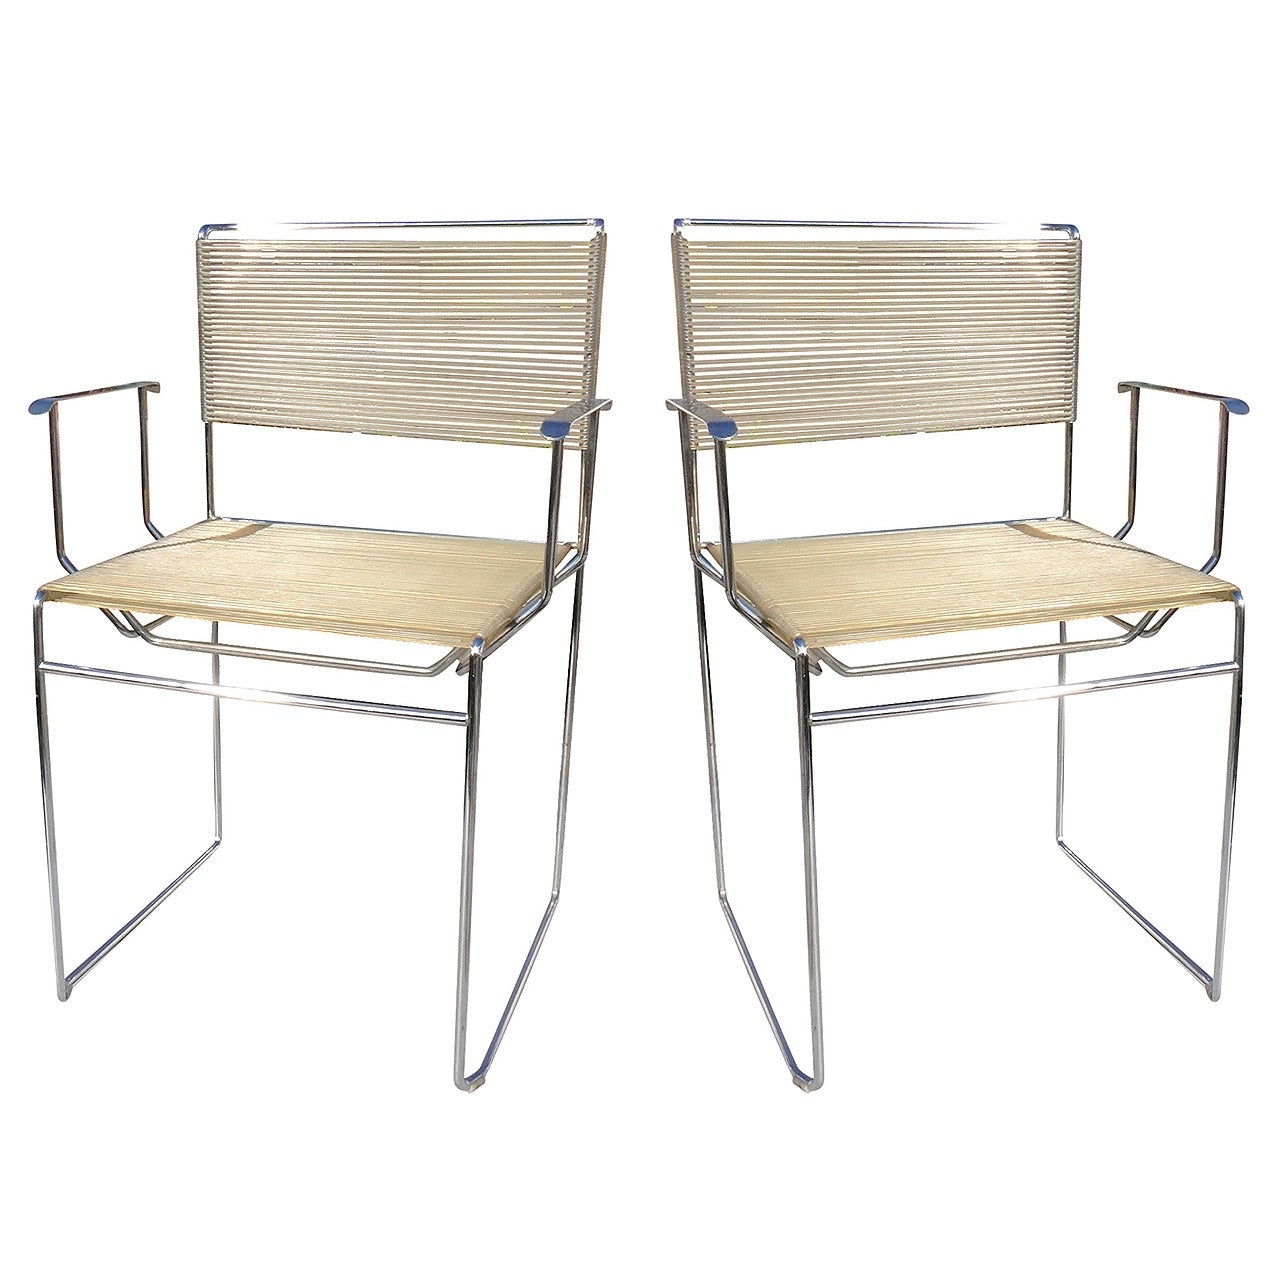 Two Chrome Plated Steel and Spaghetti Armchairs by Giandomenico Belotti